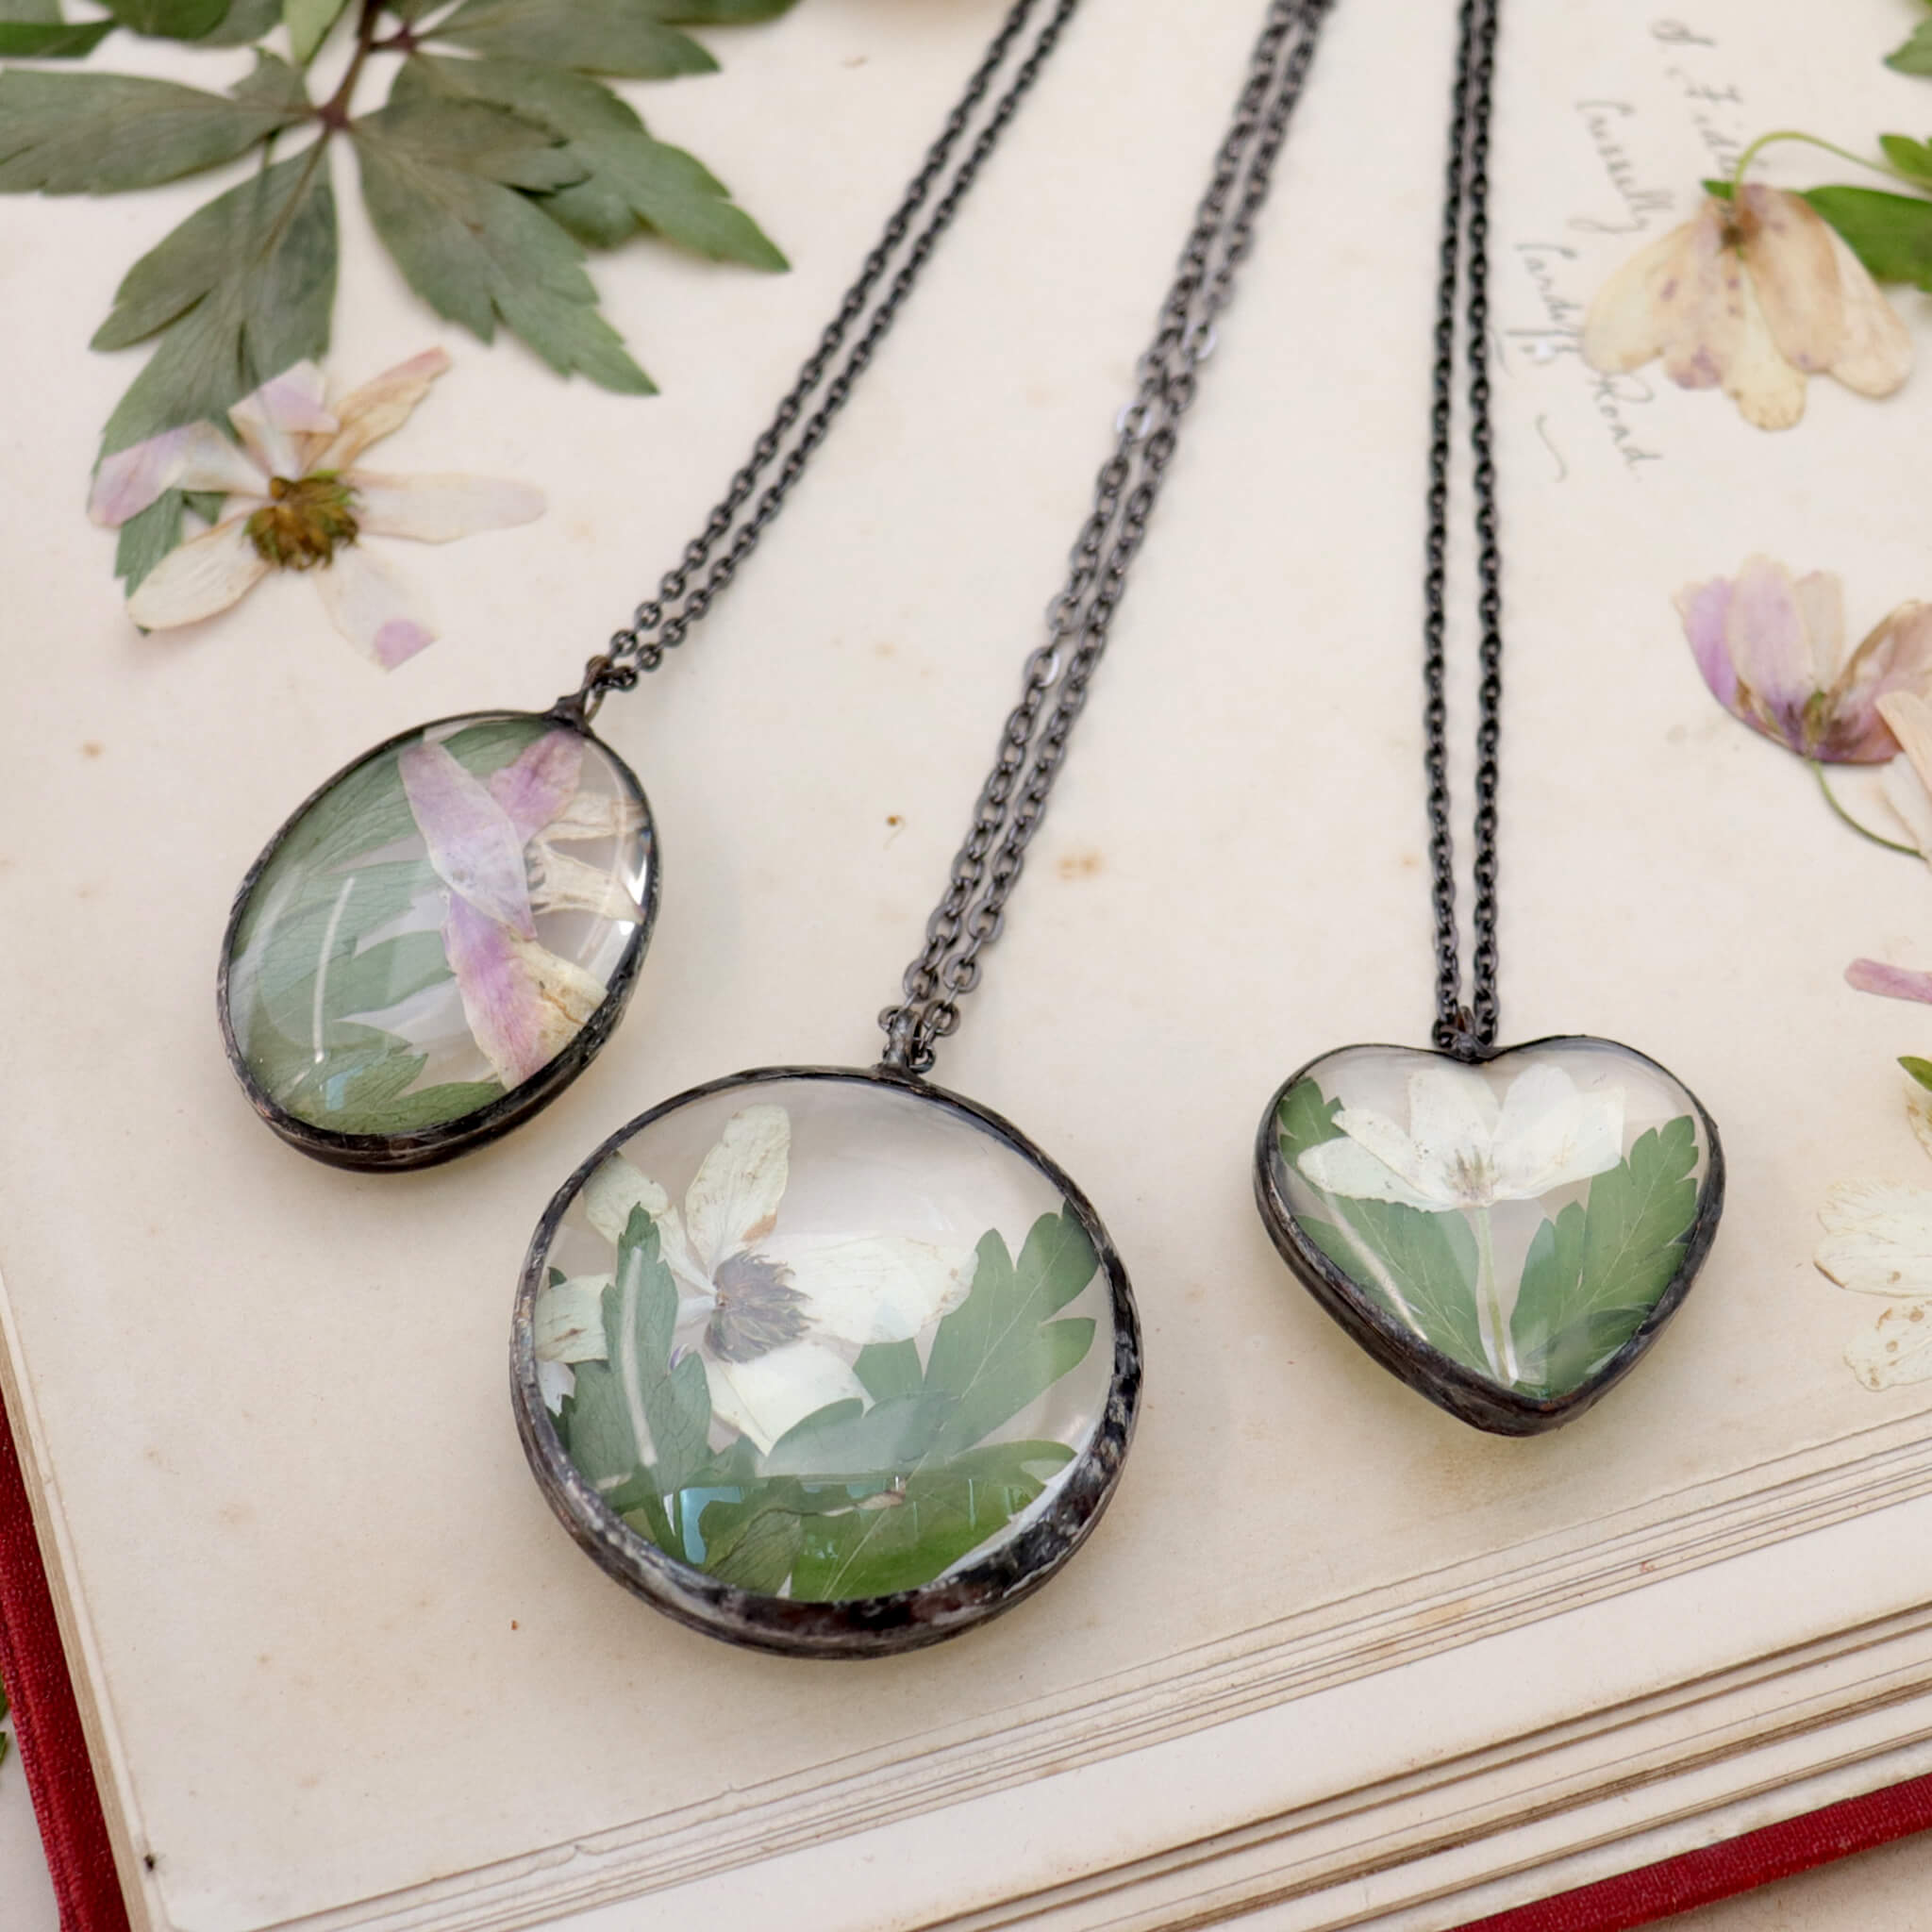 Oval, round and heart shaped necklaces on an old book. Pressed flowers around them